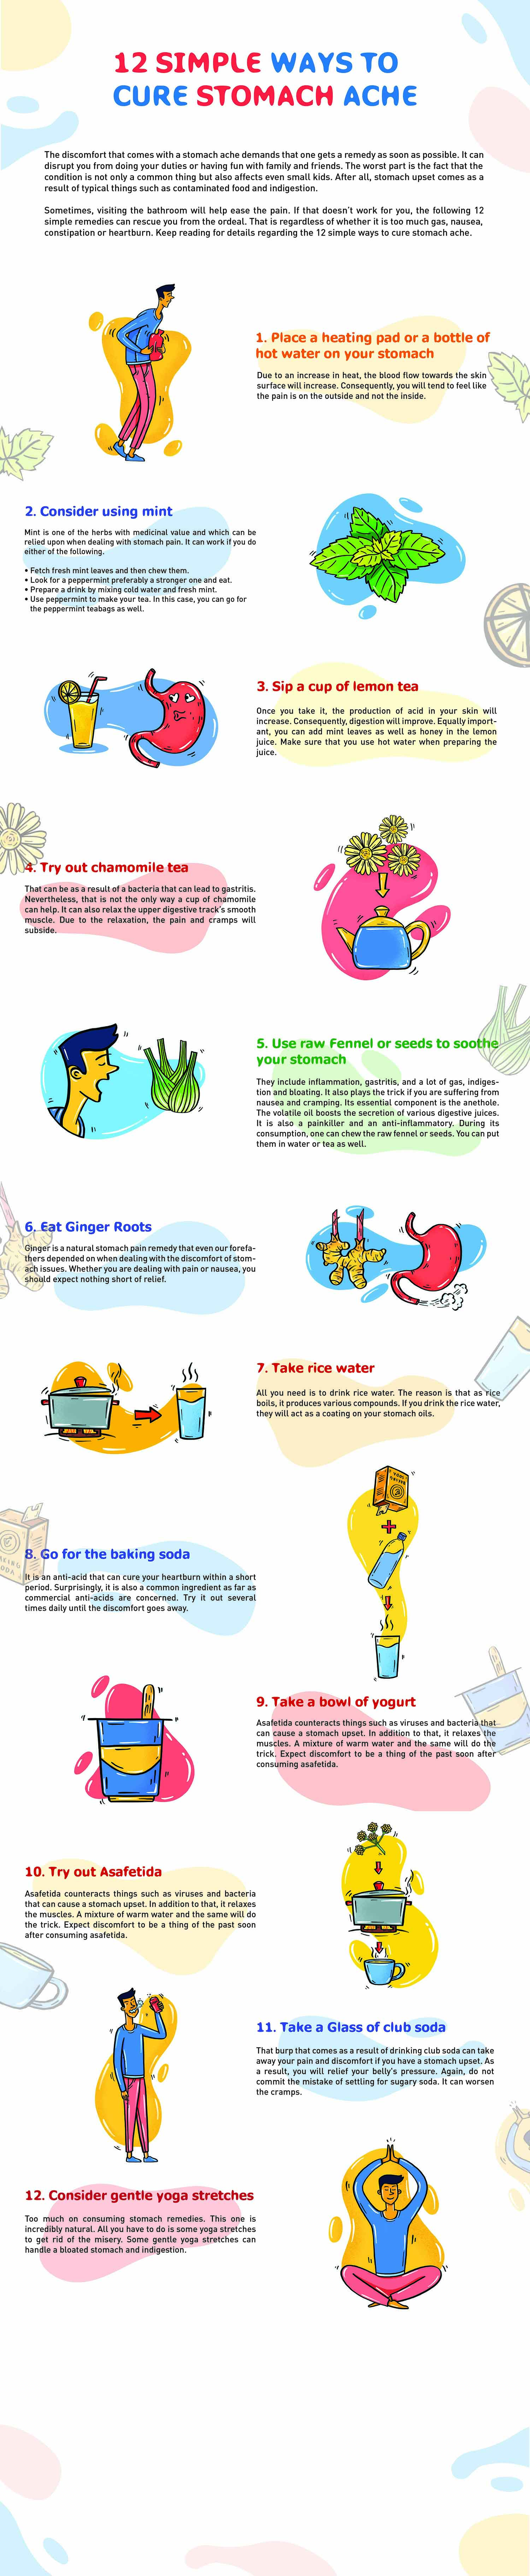 [infographic] 12 Simple ways to cure stomachache